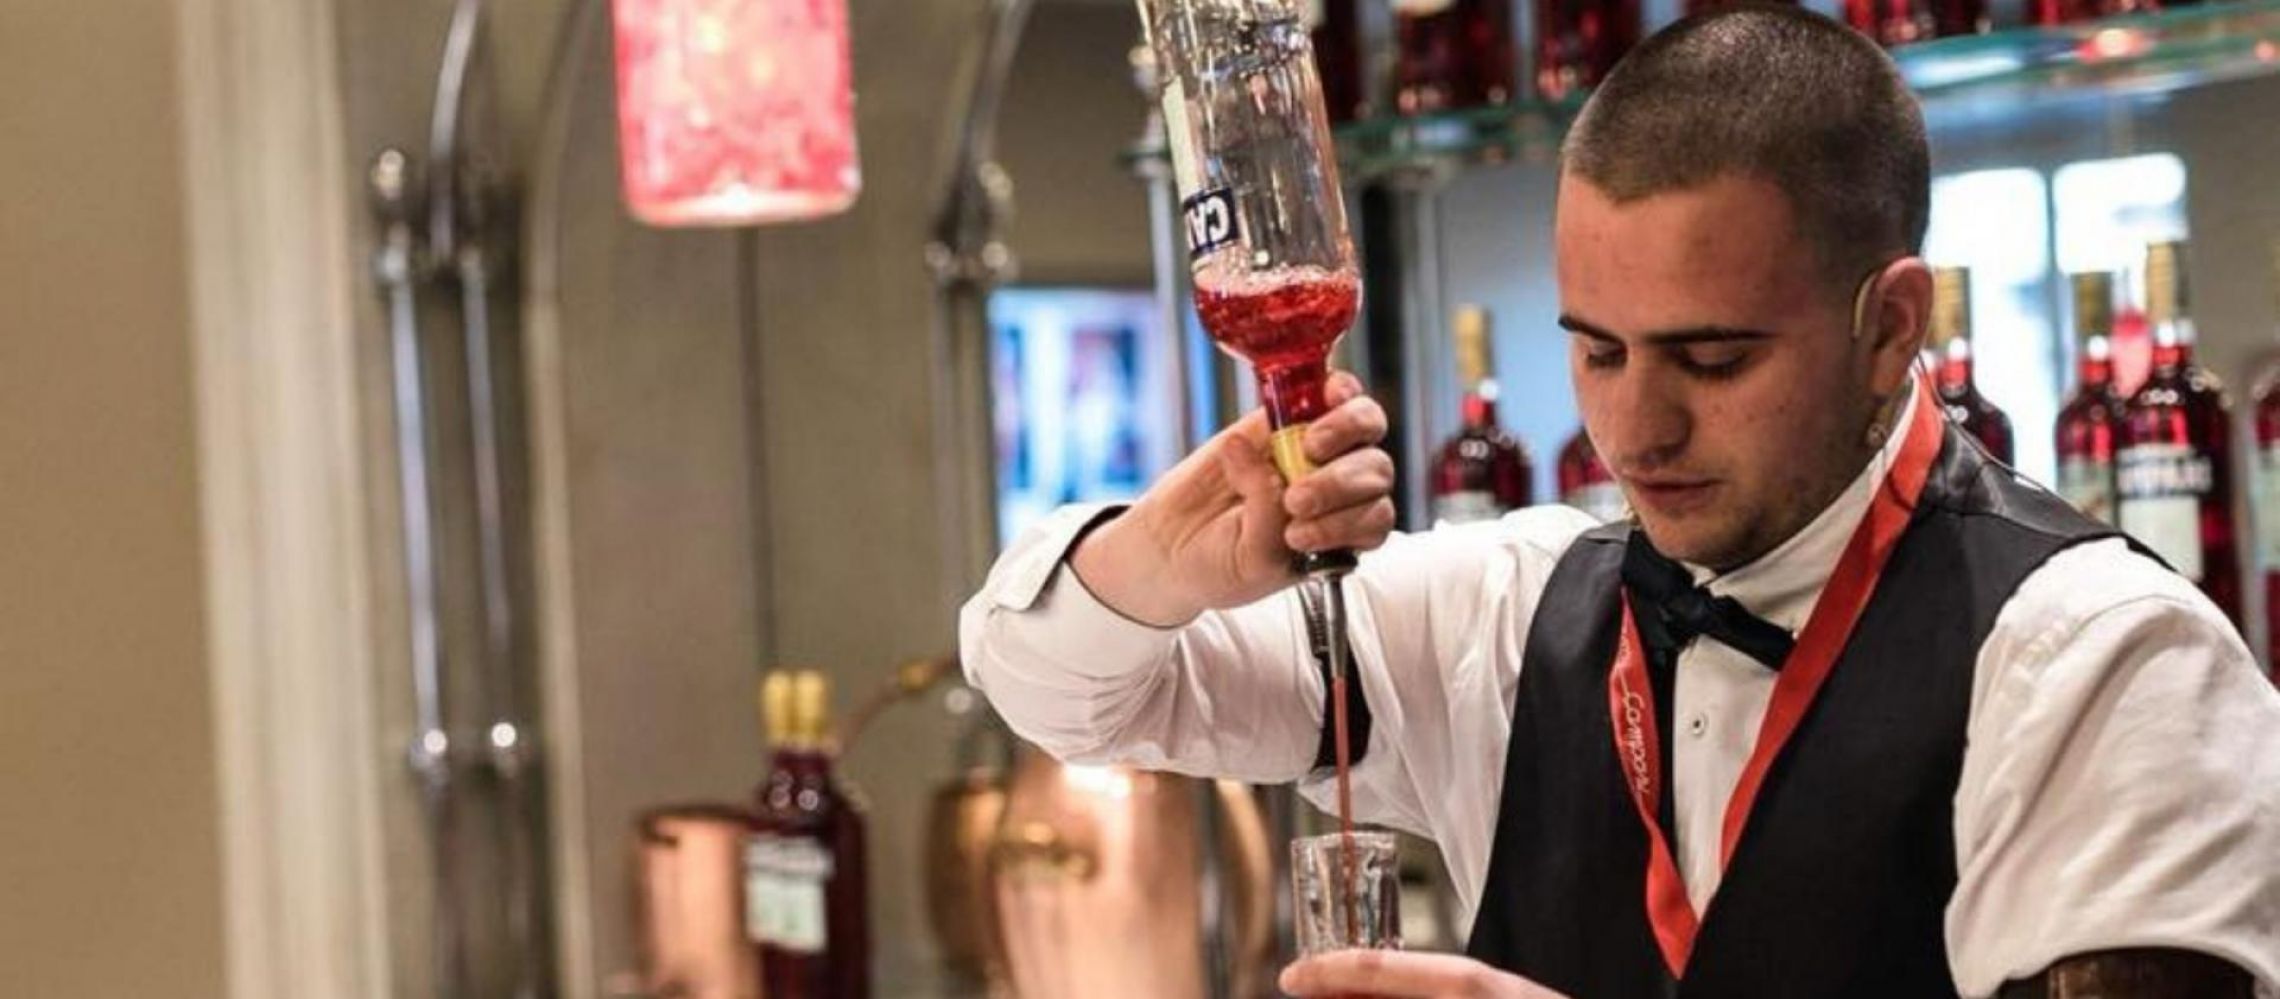 Photo for: Know Your Bartenders: Marco Meloni, Bartender at The NoMad Hotel, London